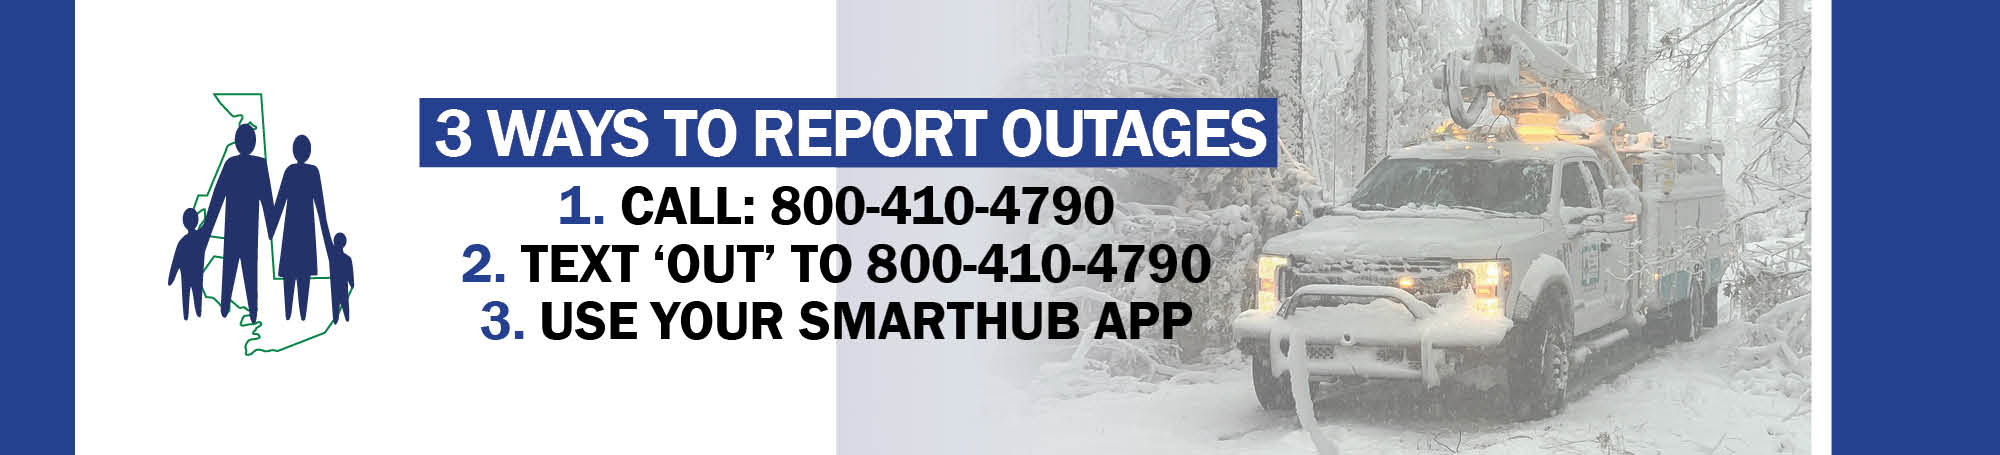 Outage Report